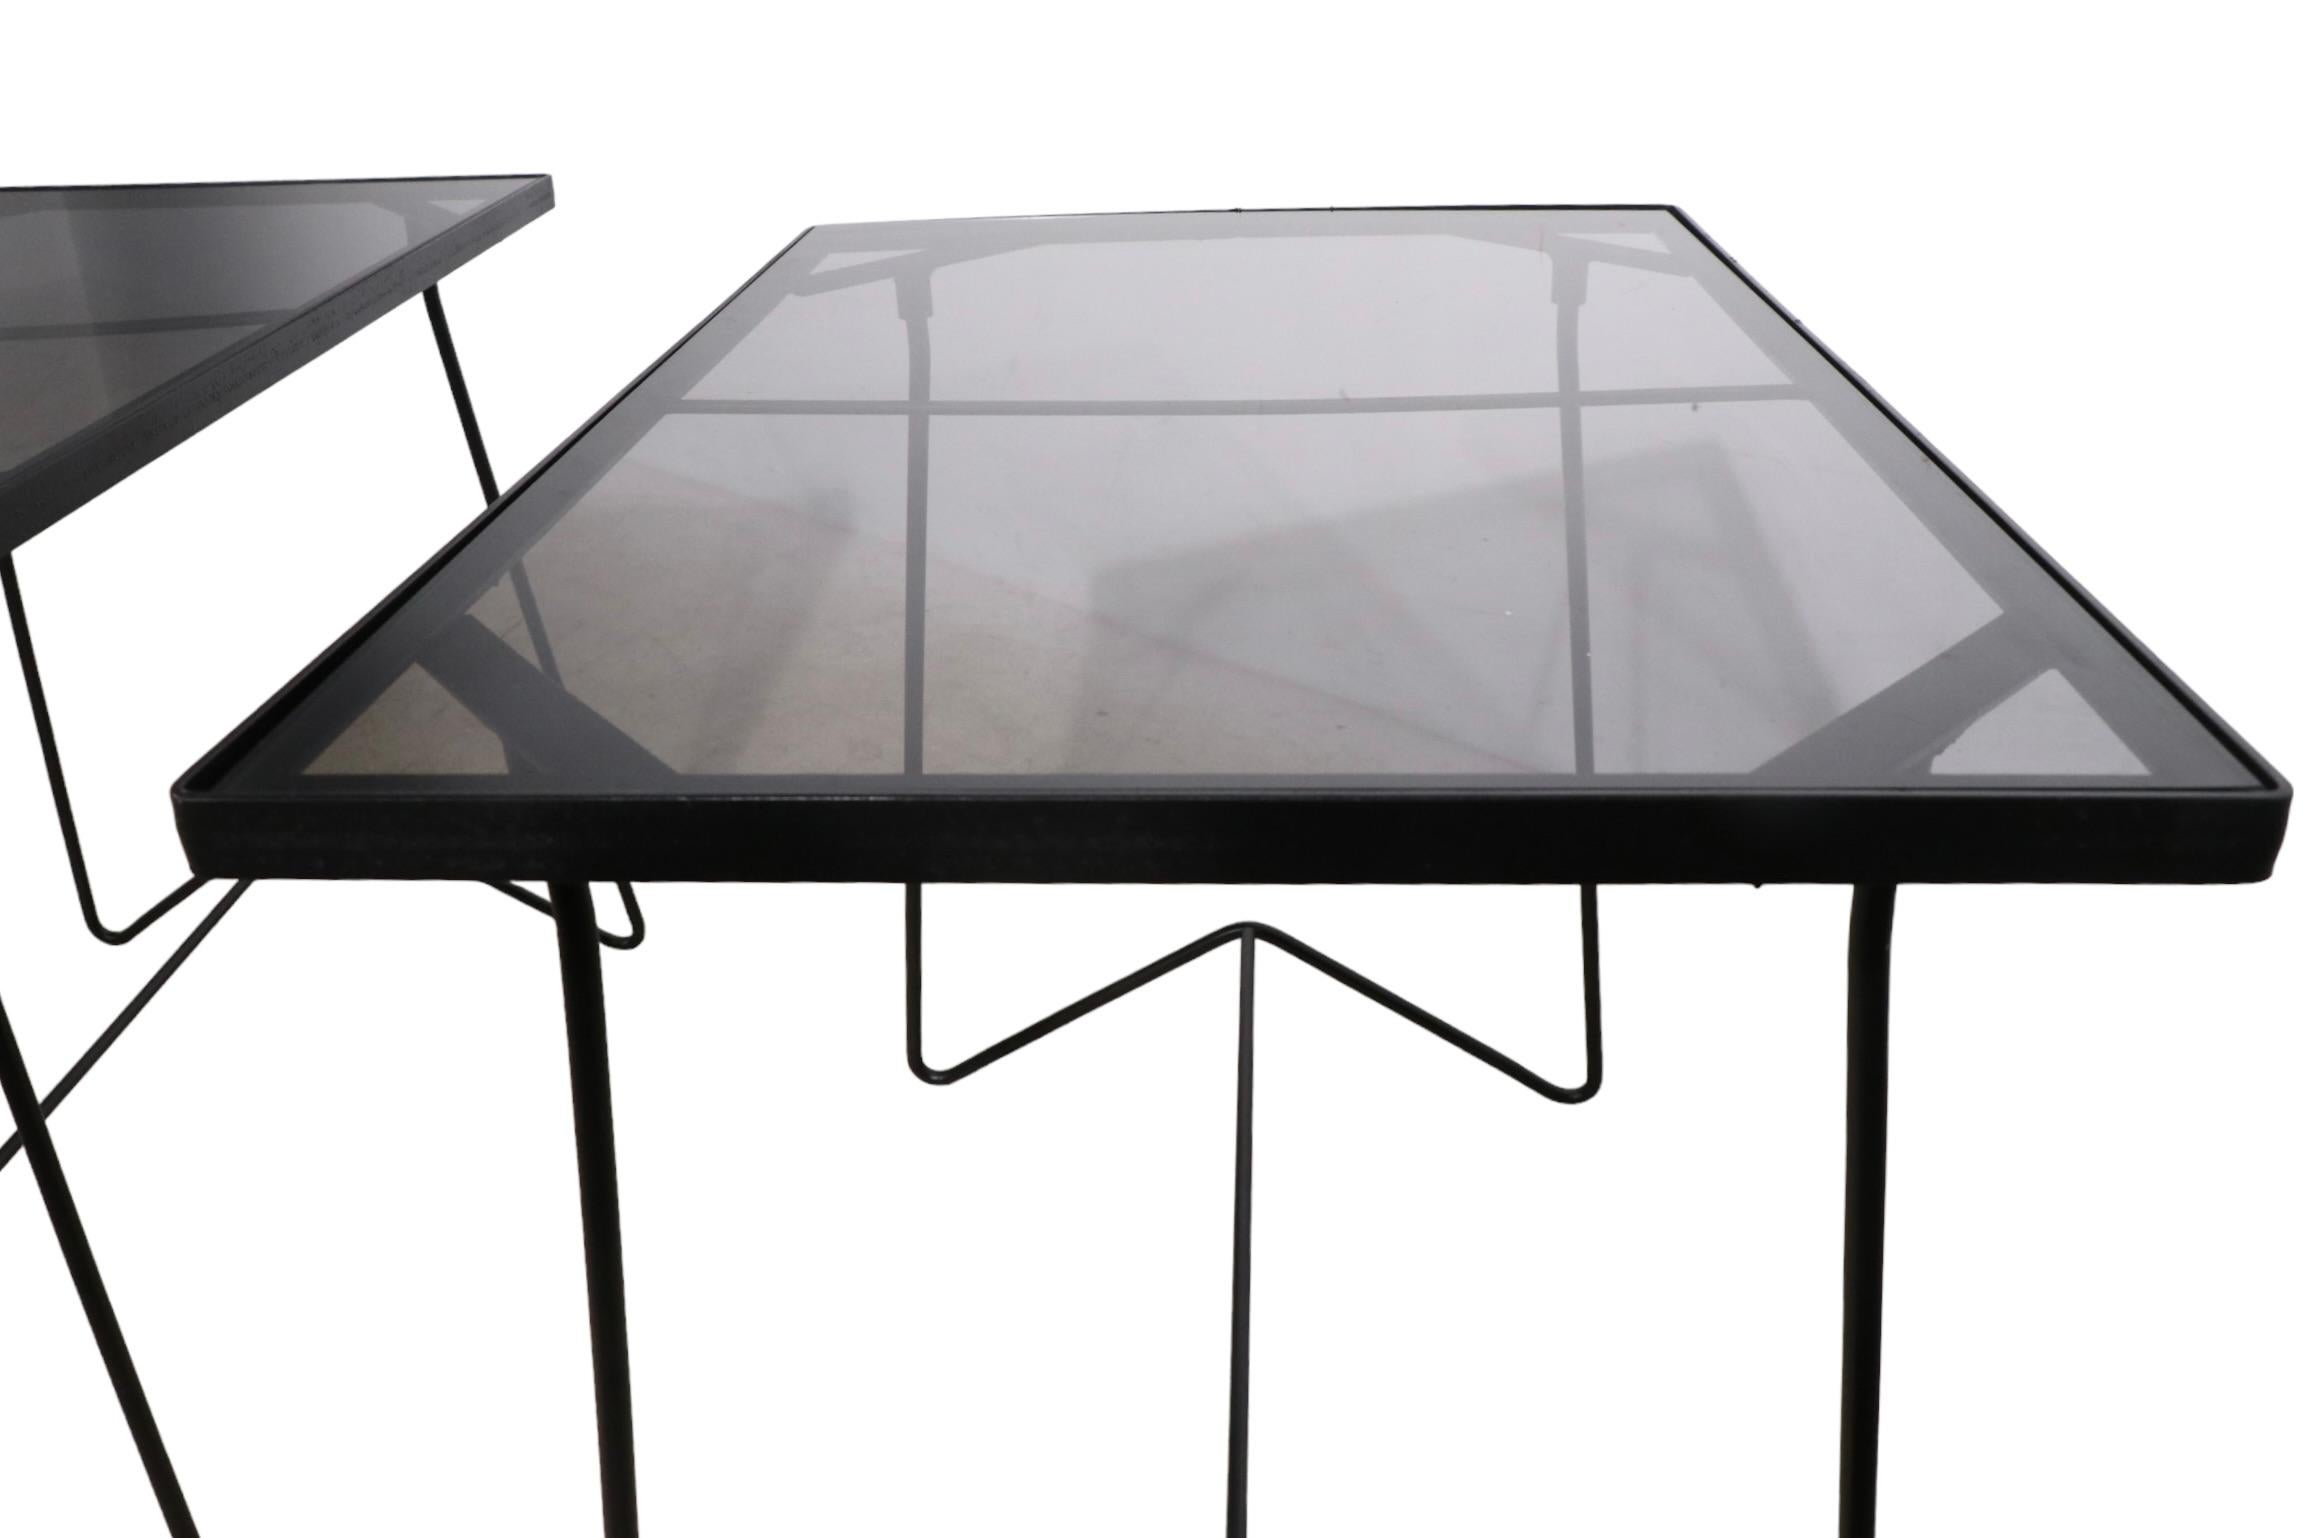 Pr. architectural side, or end tables having wrought iron frames, and tinted glass tops. These chic tables are suitable for indoor, outdoor, and or patio, poolside, garden use. Both have been recently repainted black, and the glass tops are also